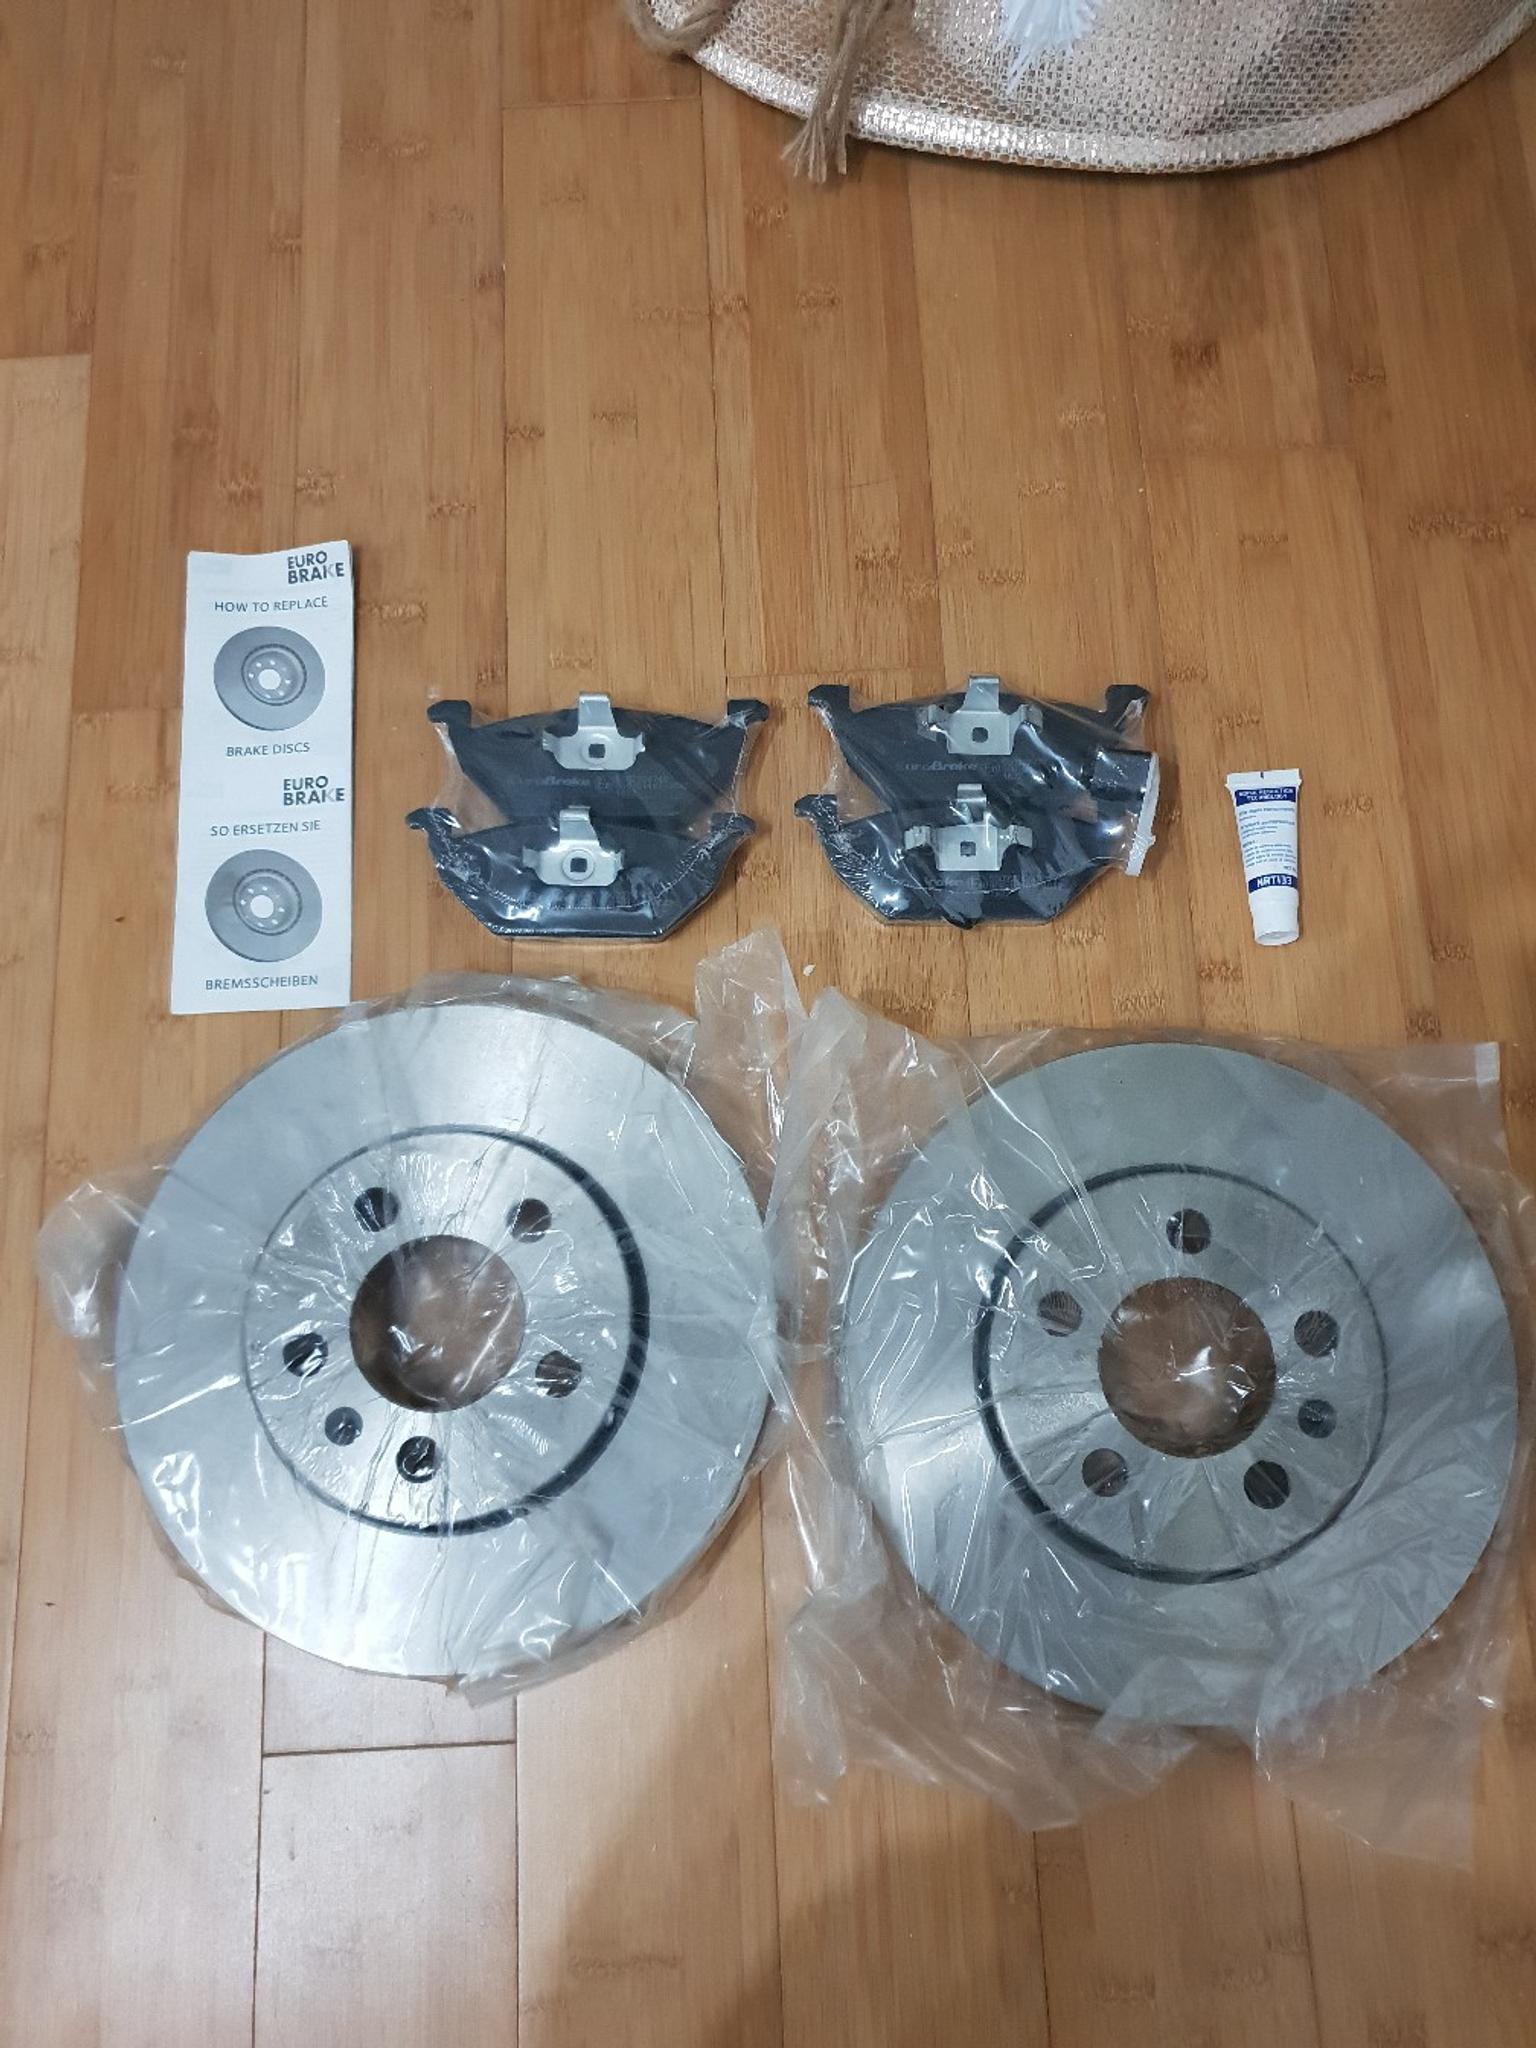 NEW FRONT DRILLED GROOVED 312mm BRAKE DISCS FOR AUDI A1 A3 Q3 TT TDI VR6 QUATTRO 